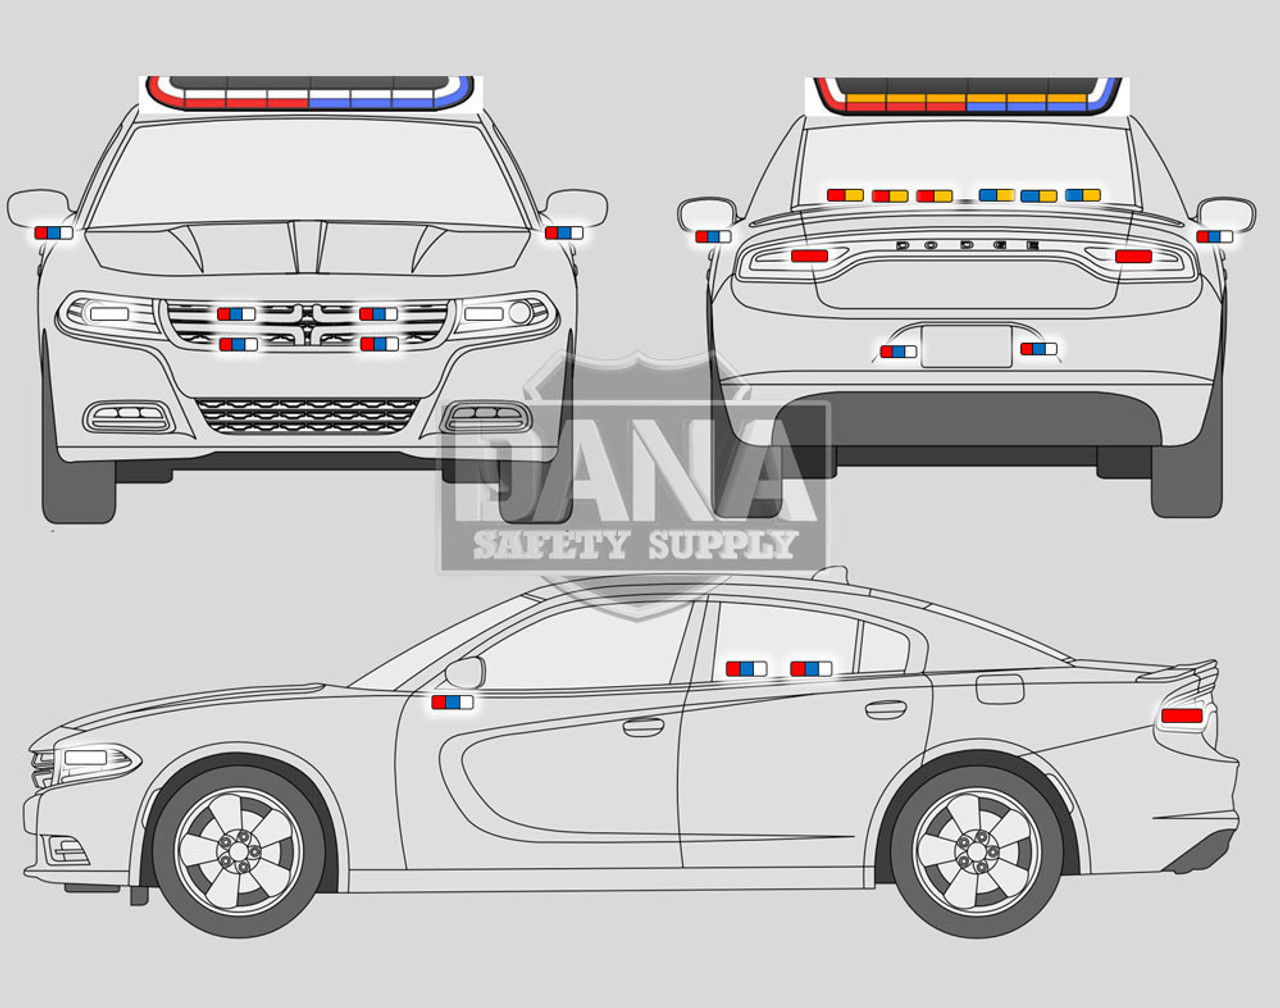 New 2023 Gray Dodge Charger PPV V8 RWD ready to be built as a Marked Patrol Package Police Pursuit Car (Emergency Lighting, Siren, Controller, Partition, Window Bars, etc.), + Delivery, G2